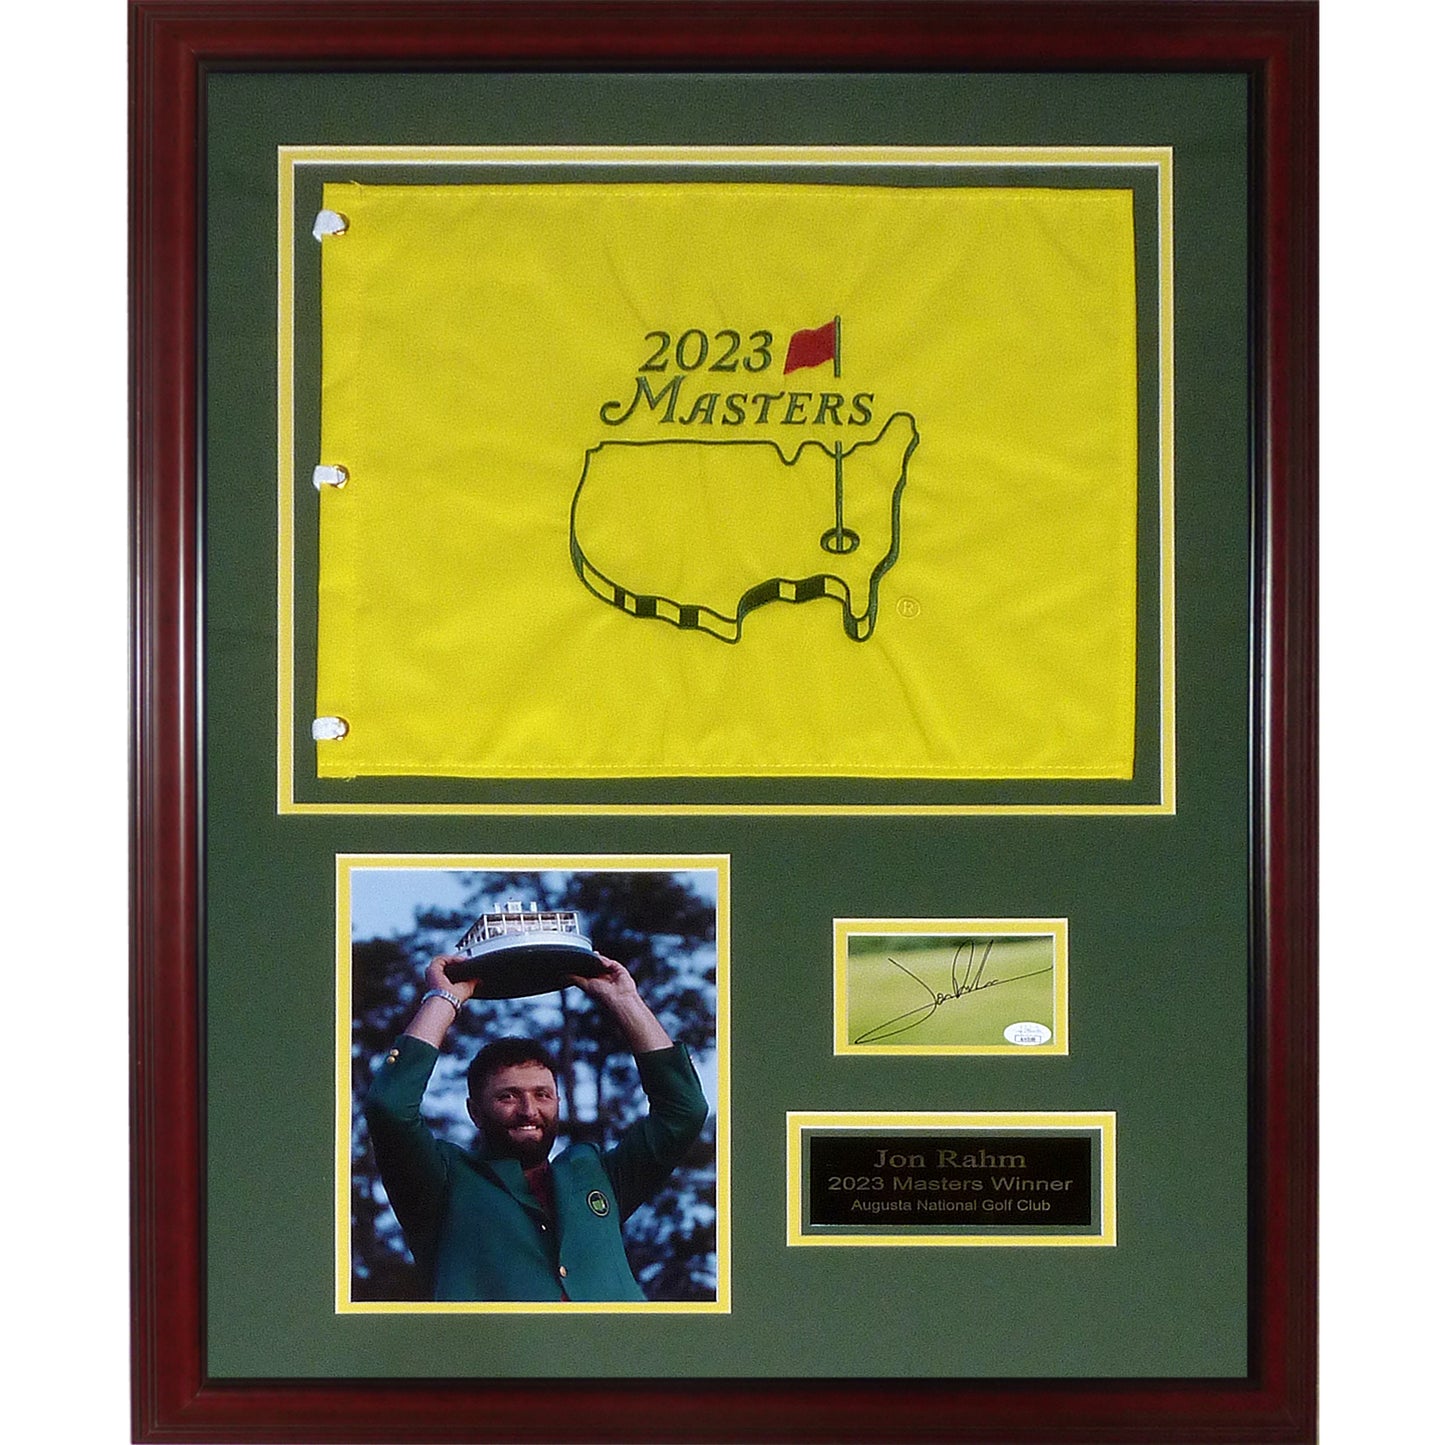 Jon Rahm Autographed 2023 Masters Flag Deluxe Framed Piece with Signature  JSA